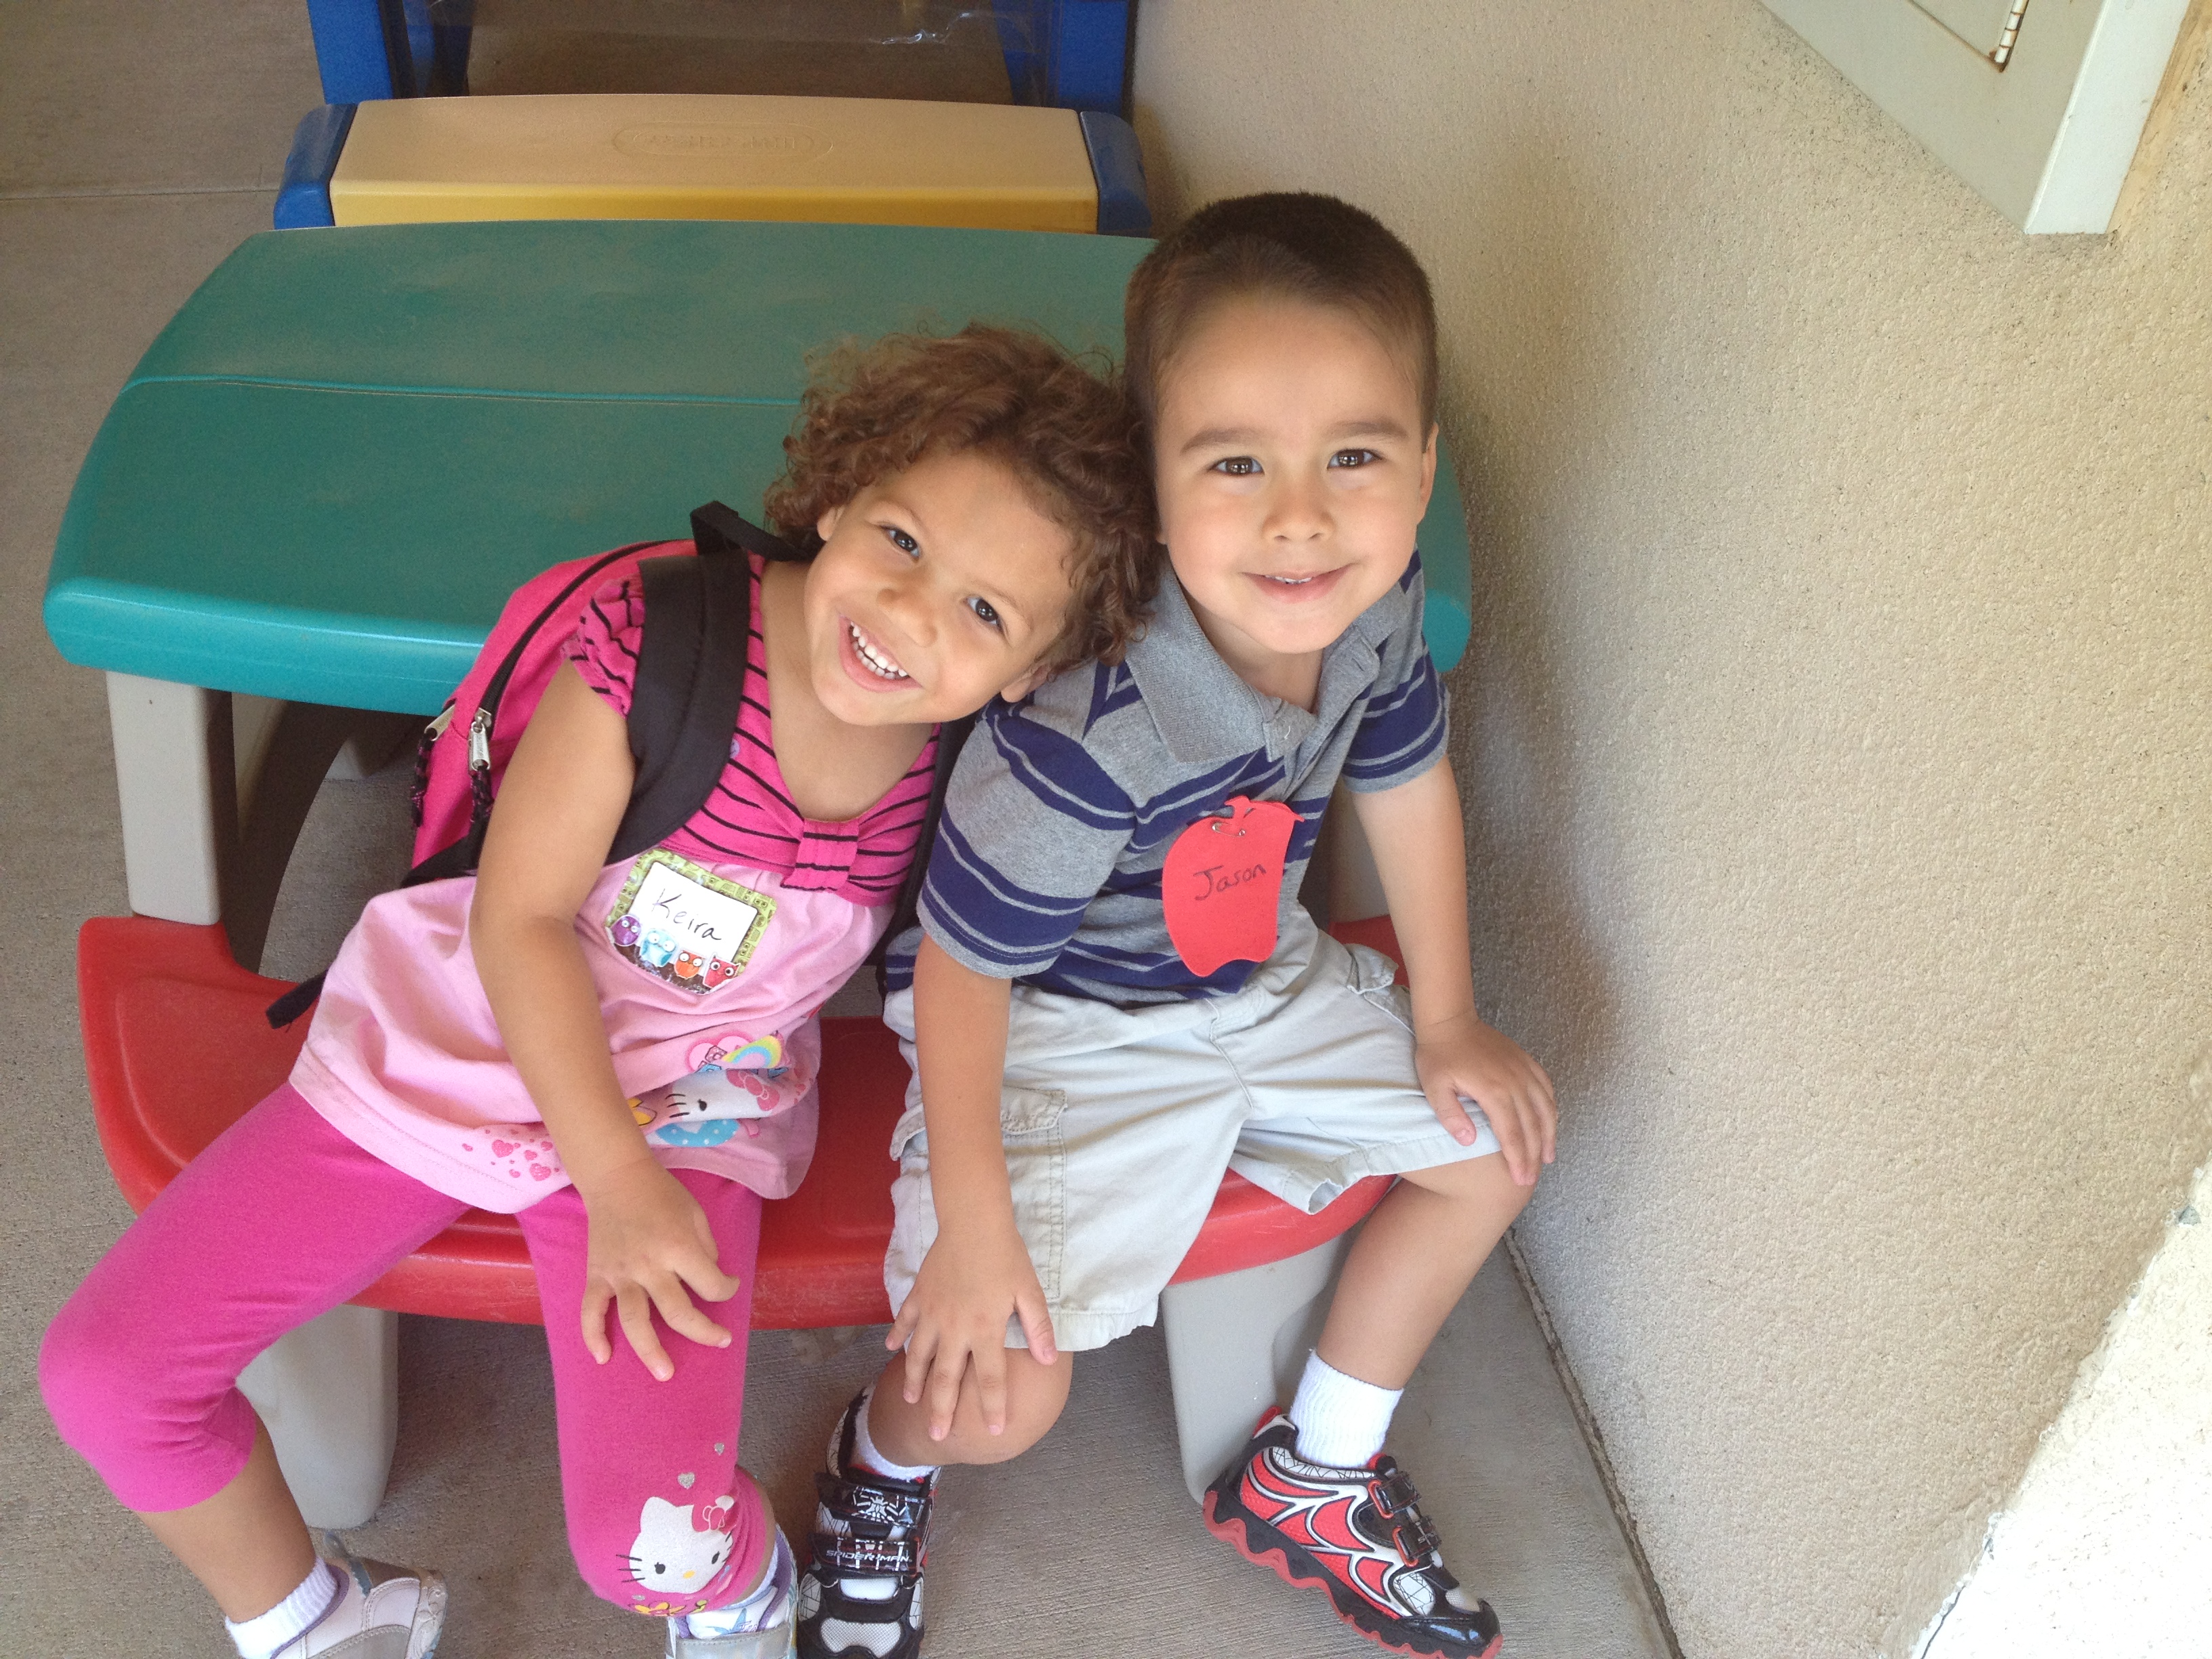 Jason and Keira's First Day of School 21 Aug 2012